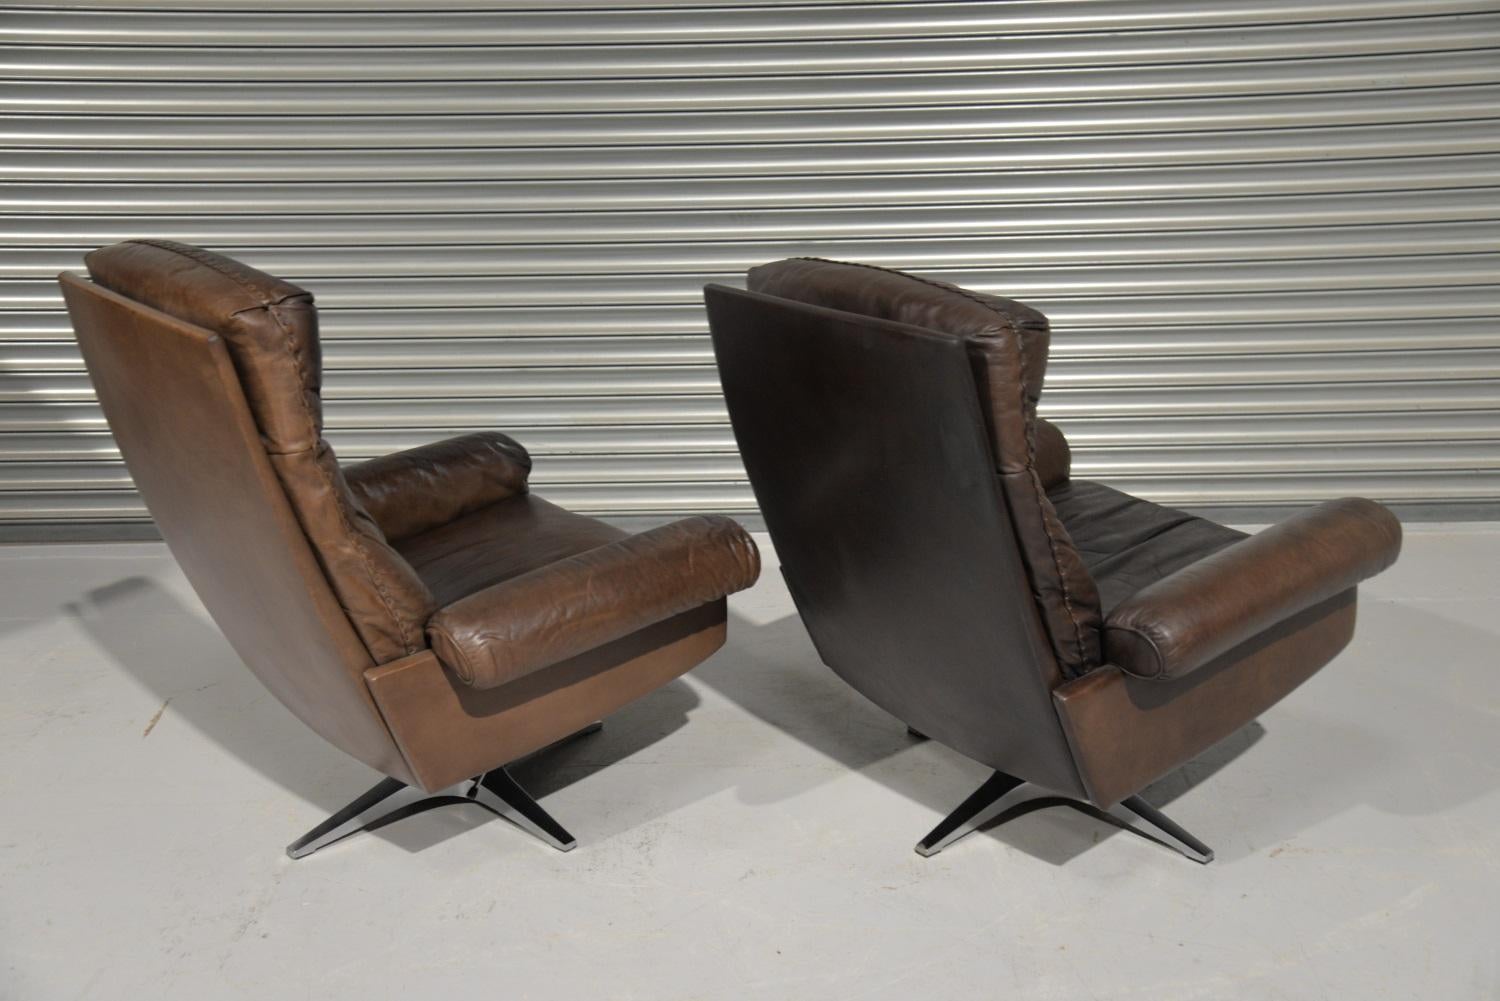 Vintage De Sede DS 31 Highback Swivel Leather Armchairs, Switzerland, 1970s In Good Condition For Sale In Fen Drayton, Cambridgeshire